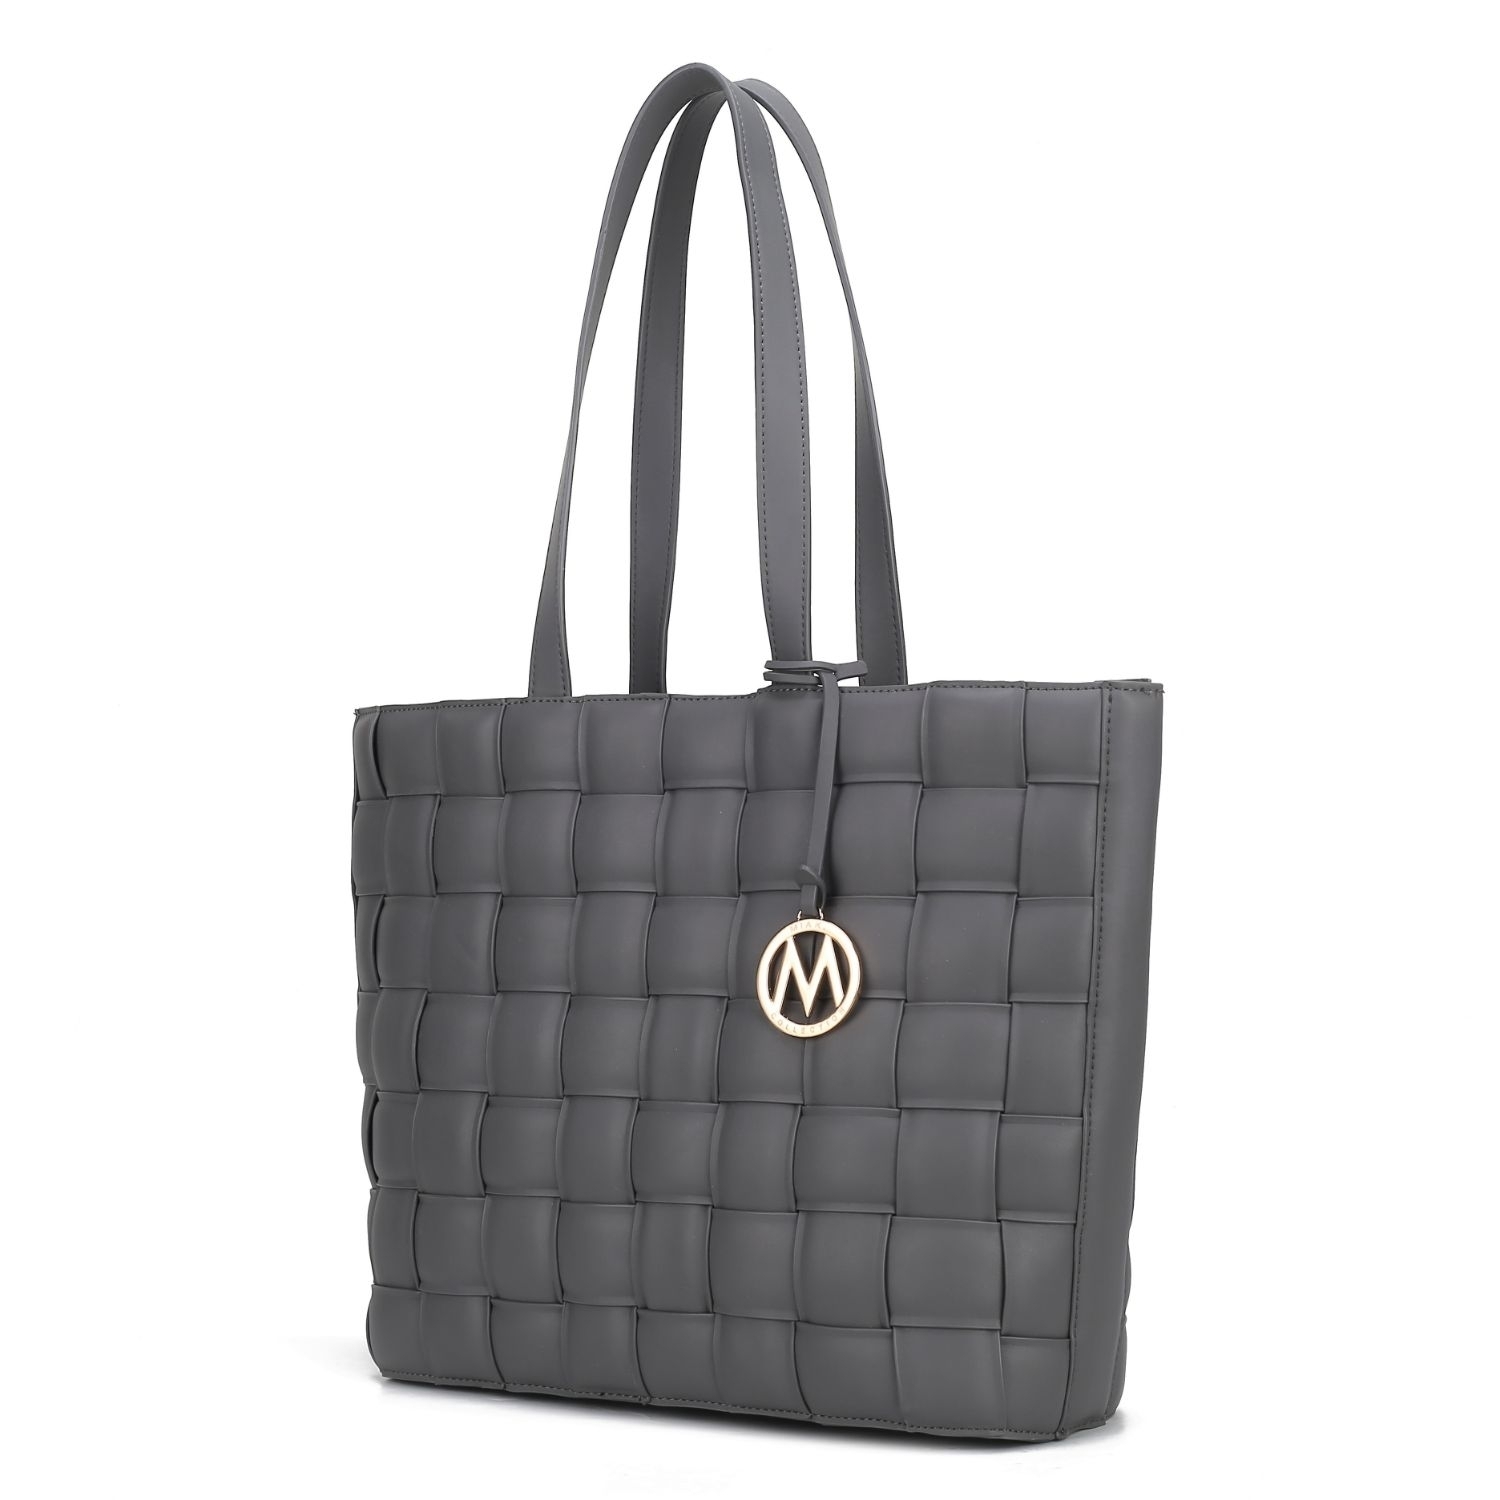 MKF Collection Rowan Woven Vegan Leather Women's Tote Bag By Mia K - Charcoal